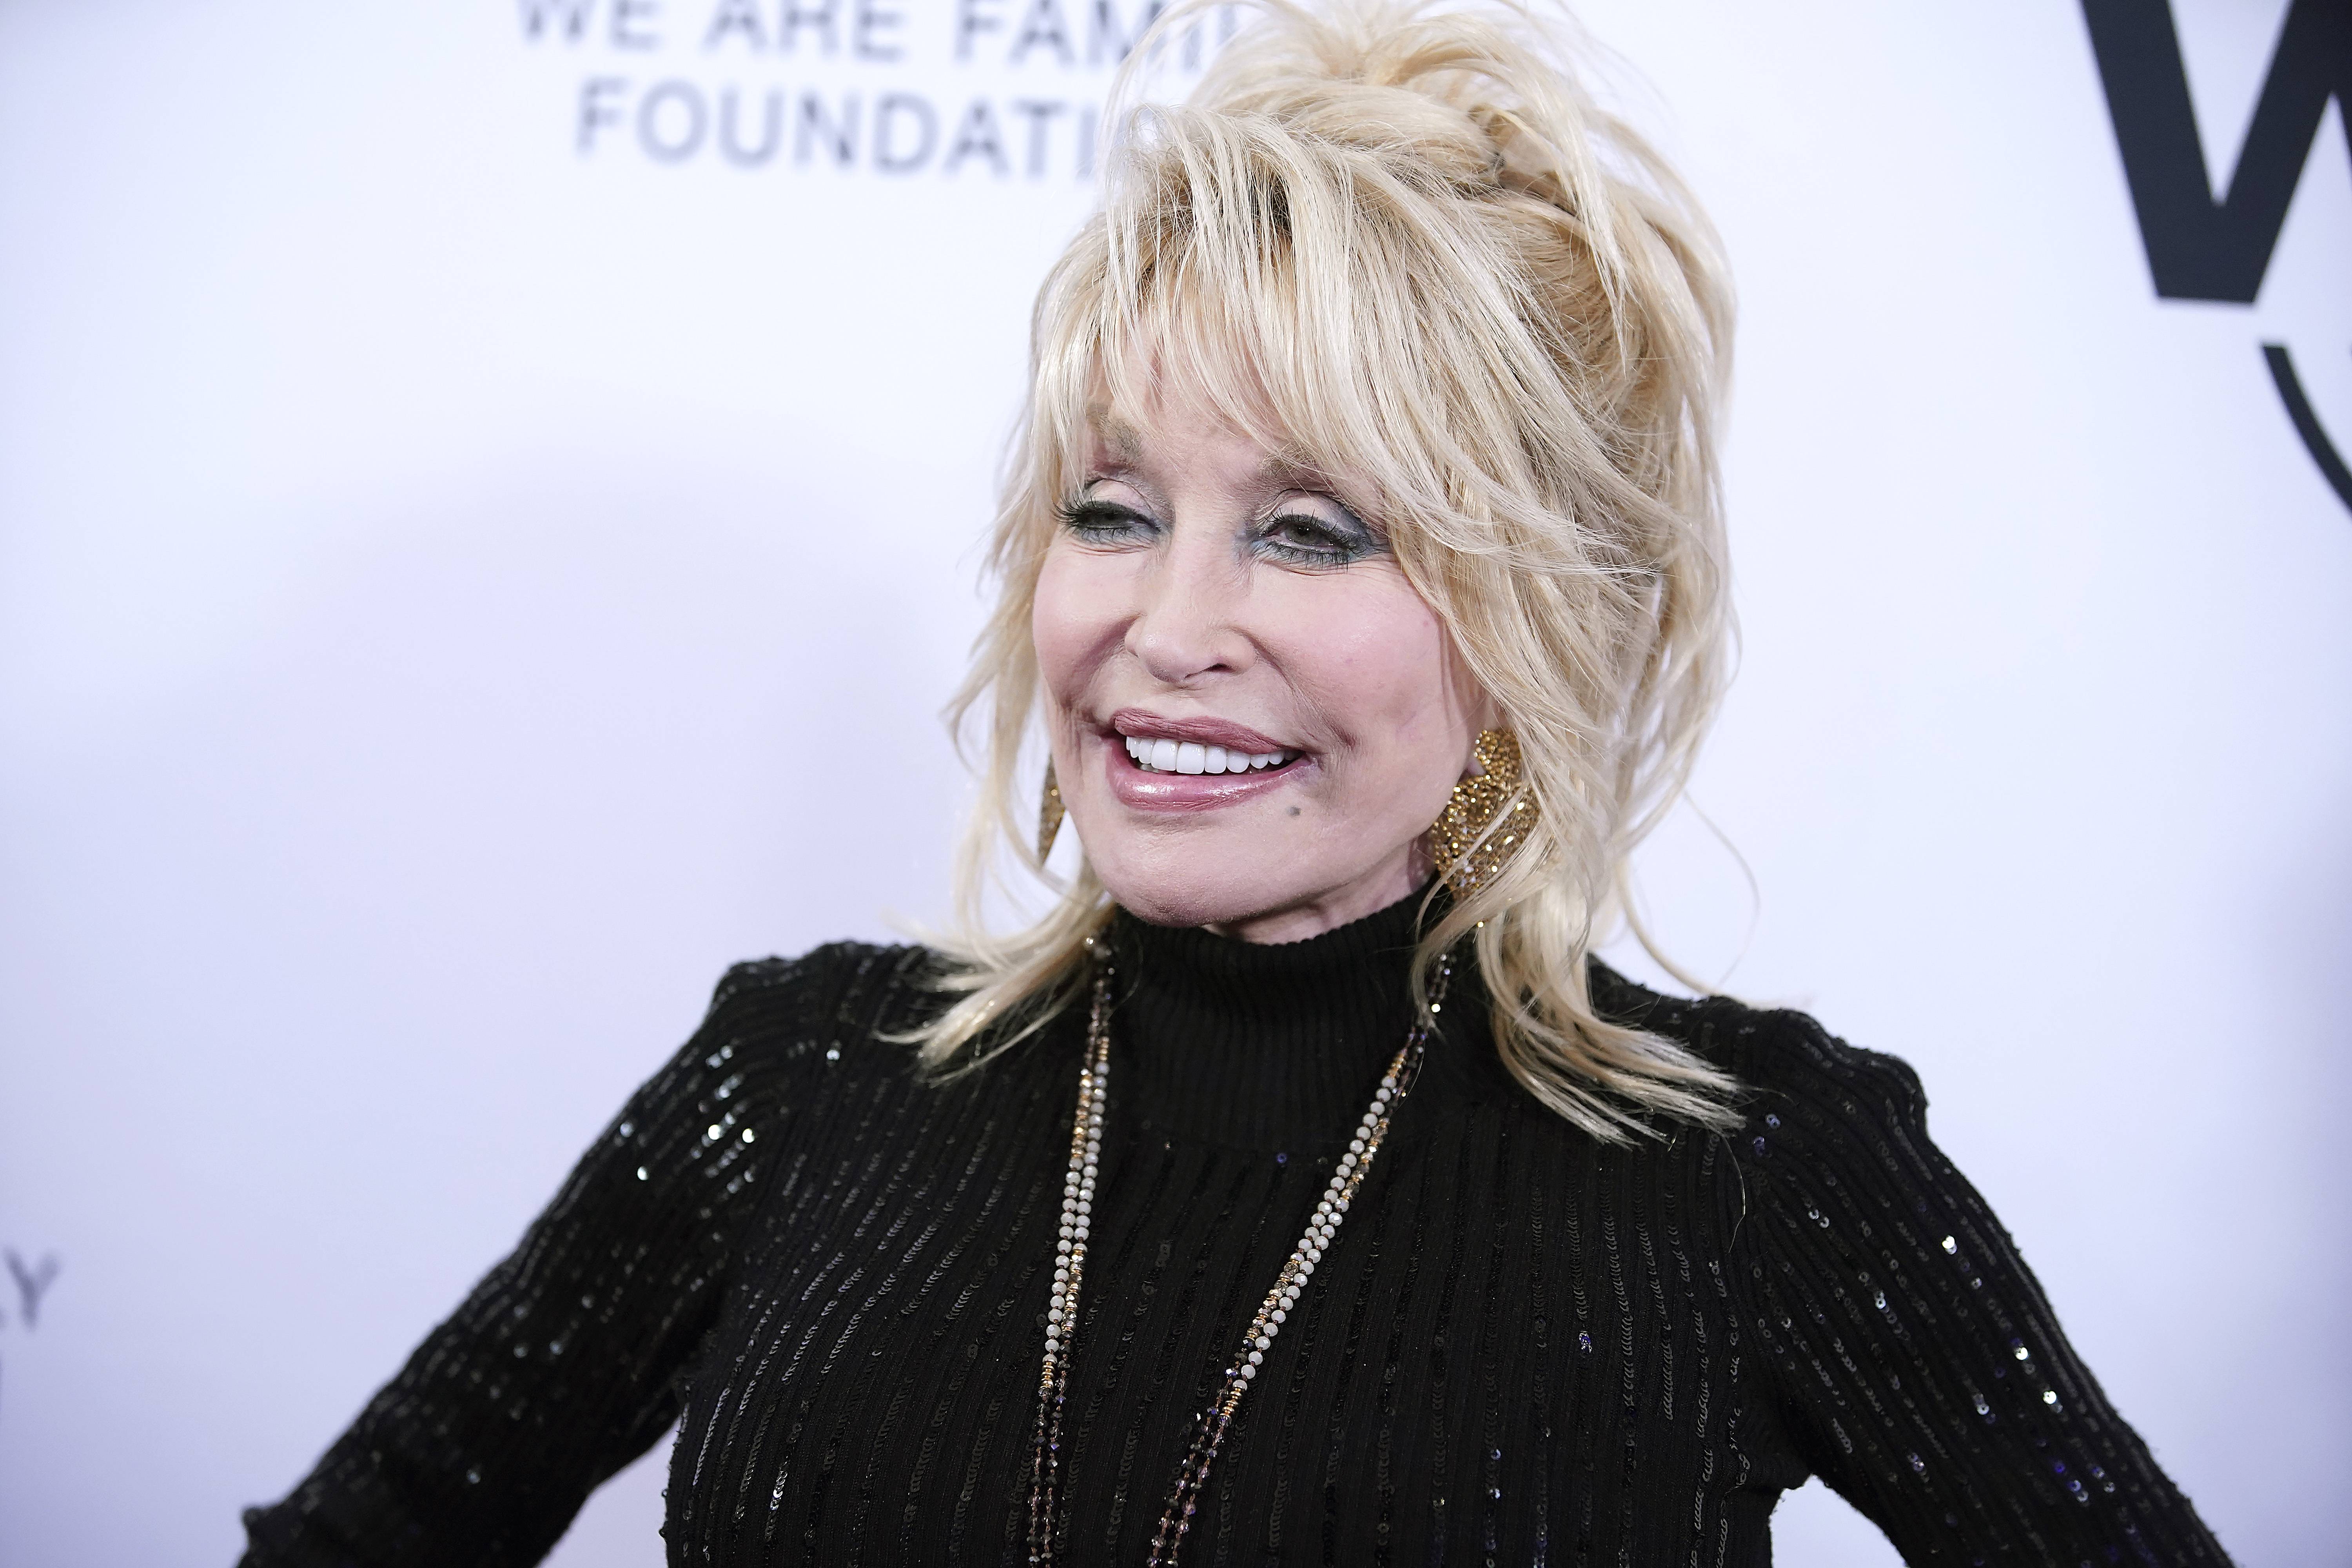 Dolly Parton at We Are Family Foundation